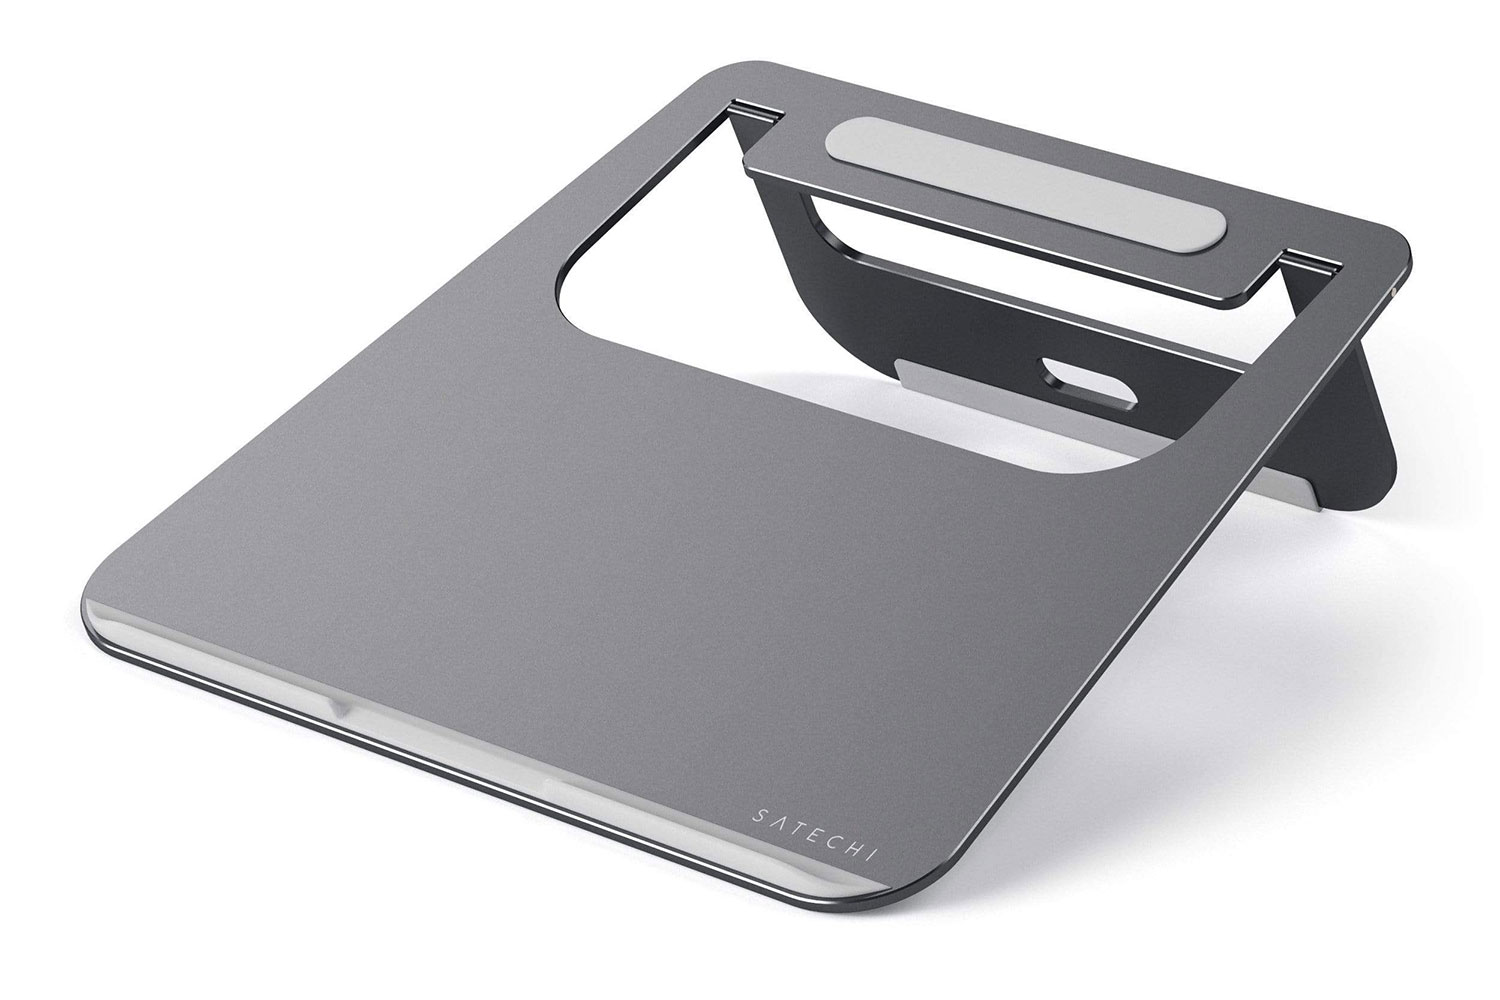 The Satechi Aluminum Laptop Stand for MacBook Pro and MacBook Air.